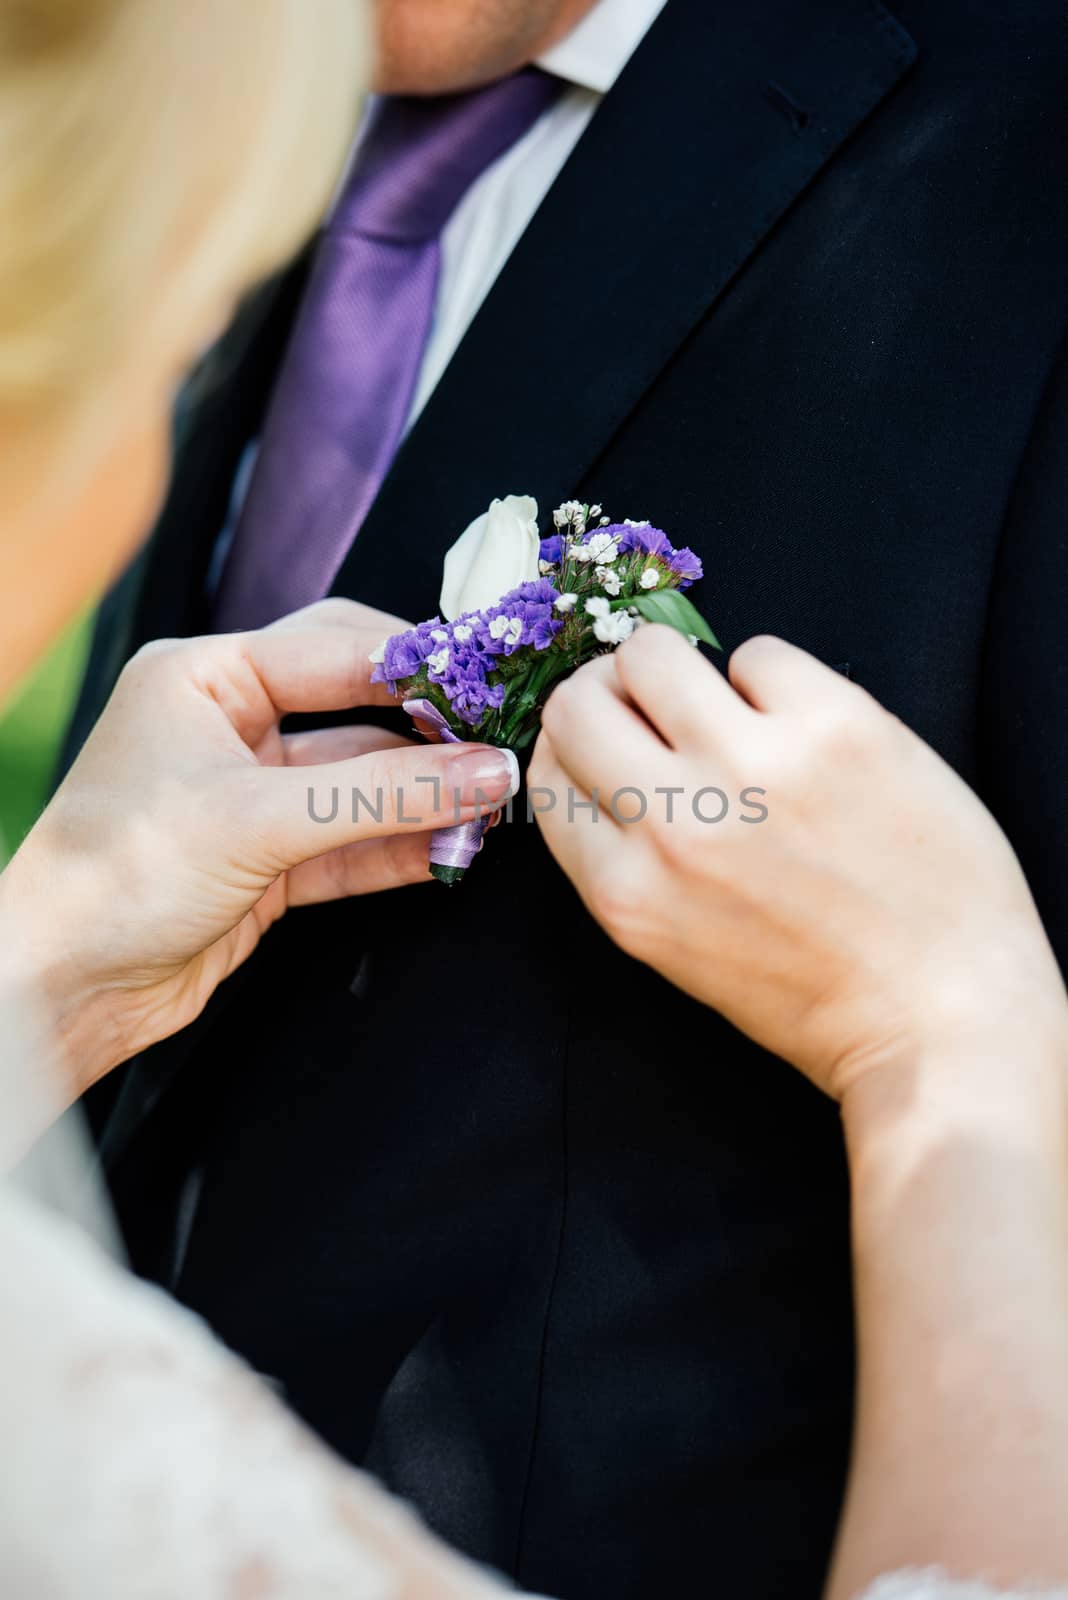 Woman inserting the boutonniere in buttonhole of man in suit